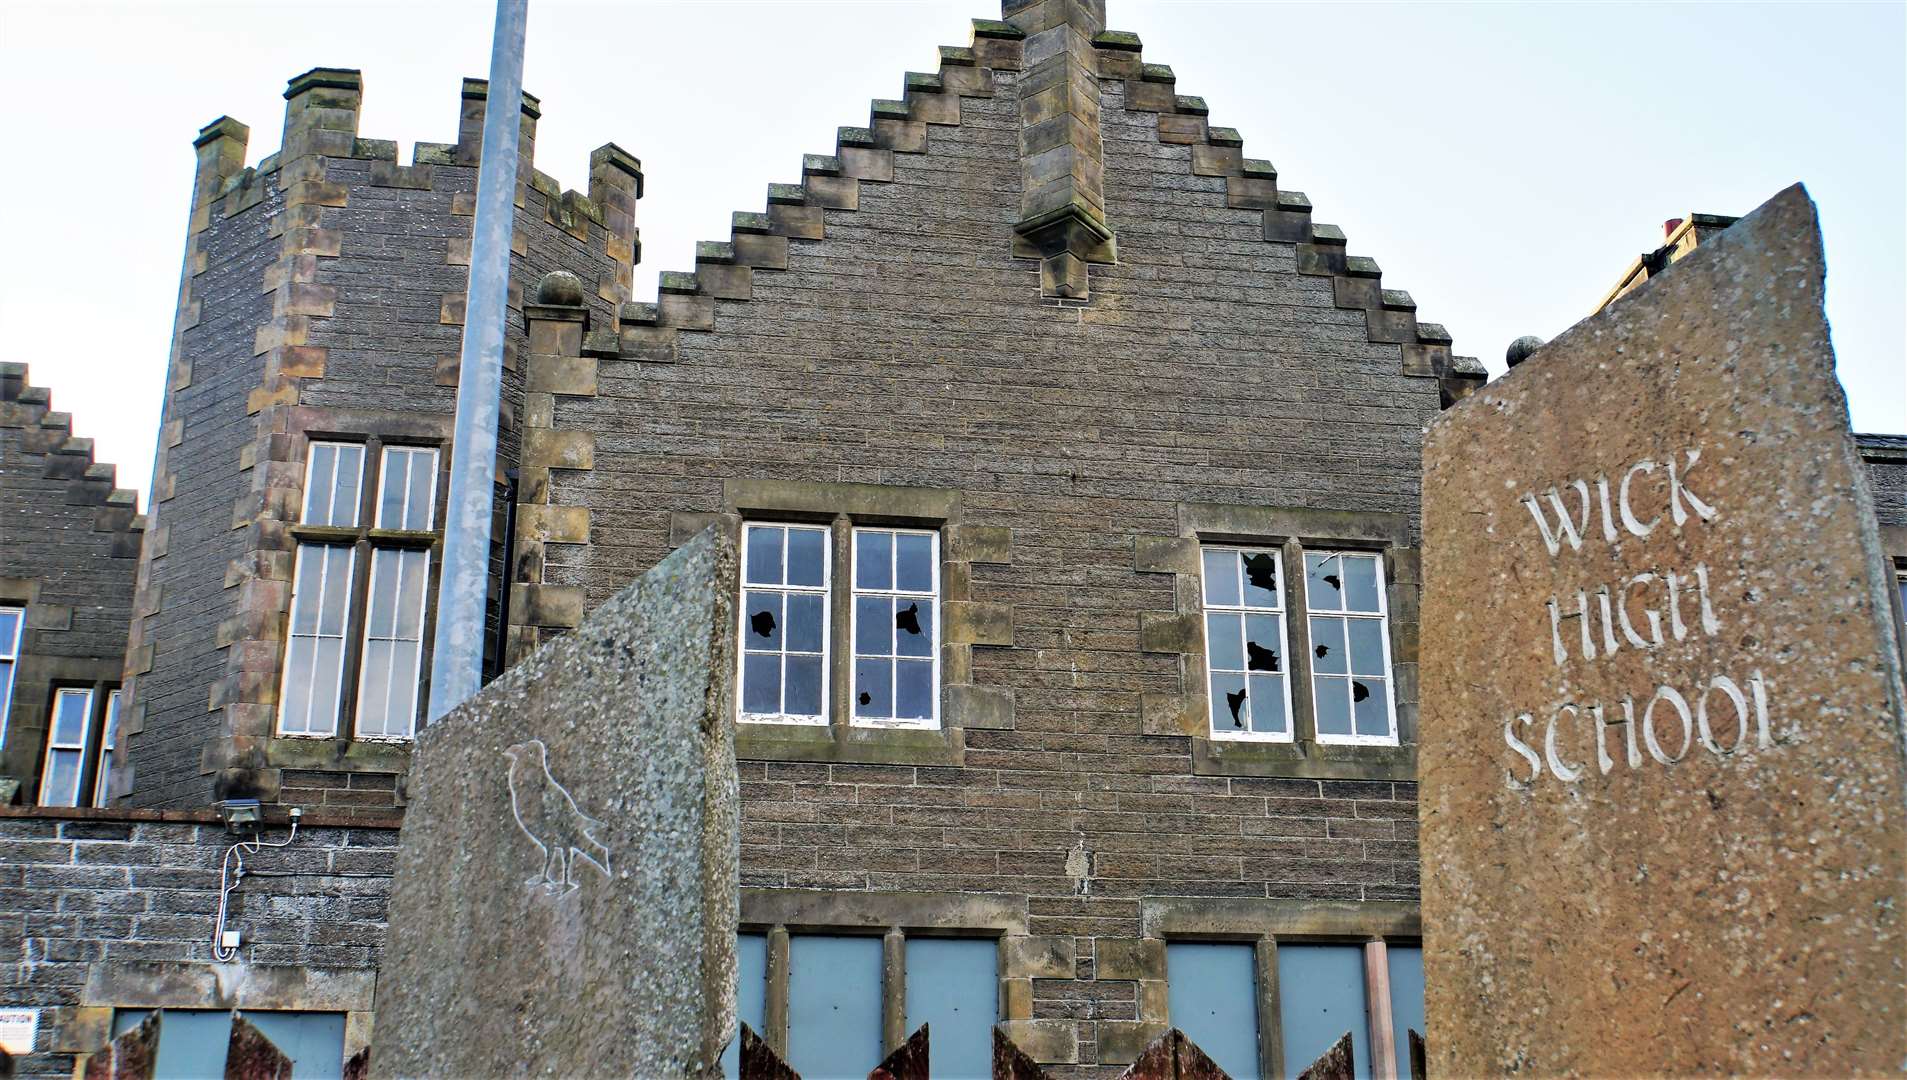 The former Wick High School was recently sold at auction. Could the missing statue still exist within it? Picture: DGS